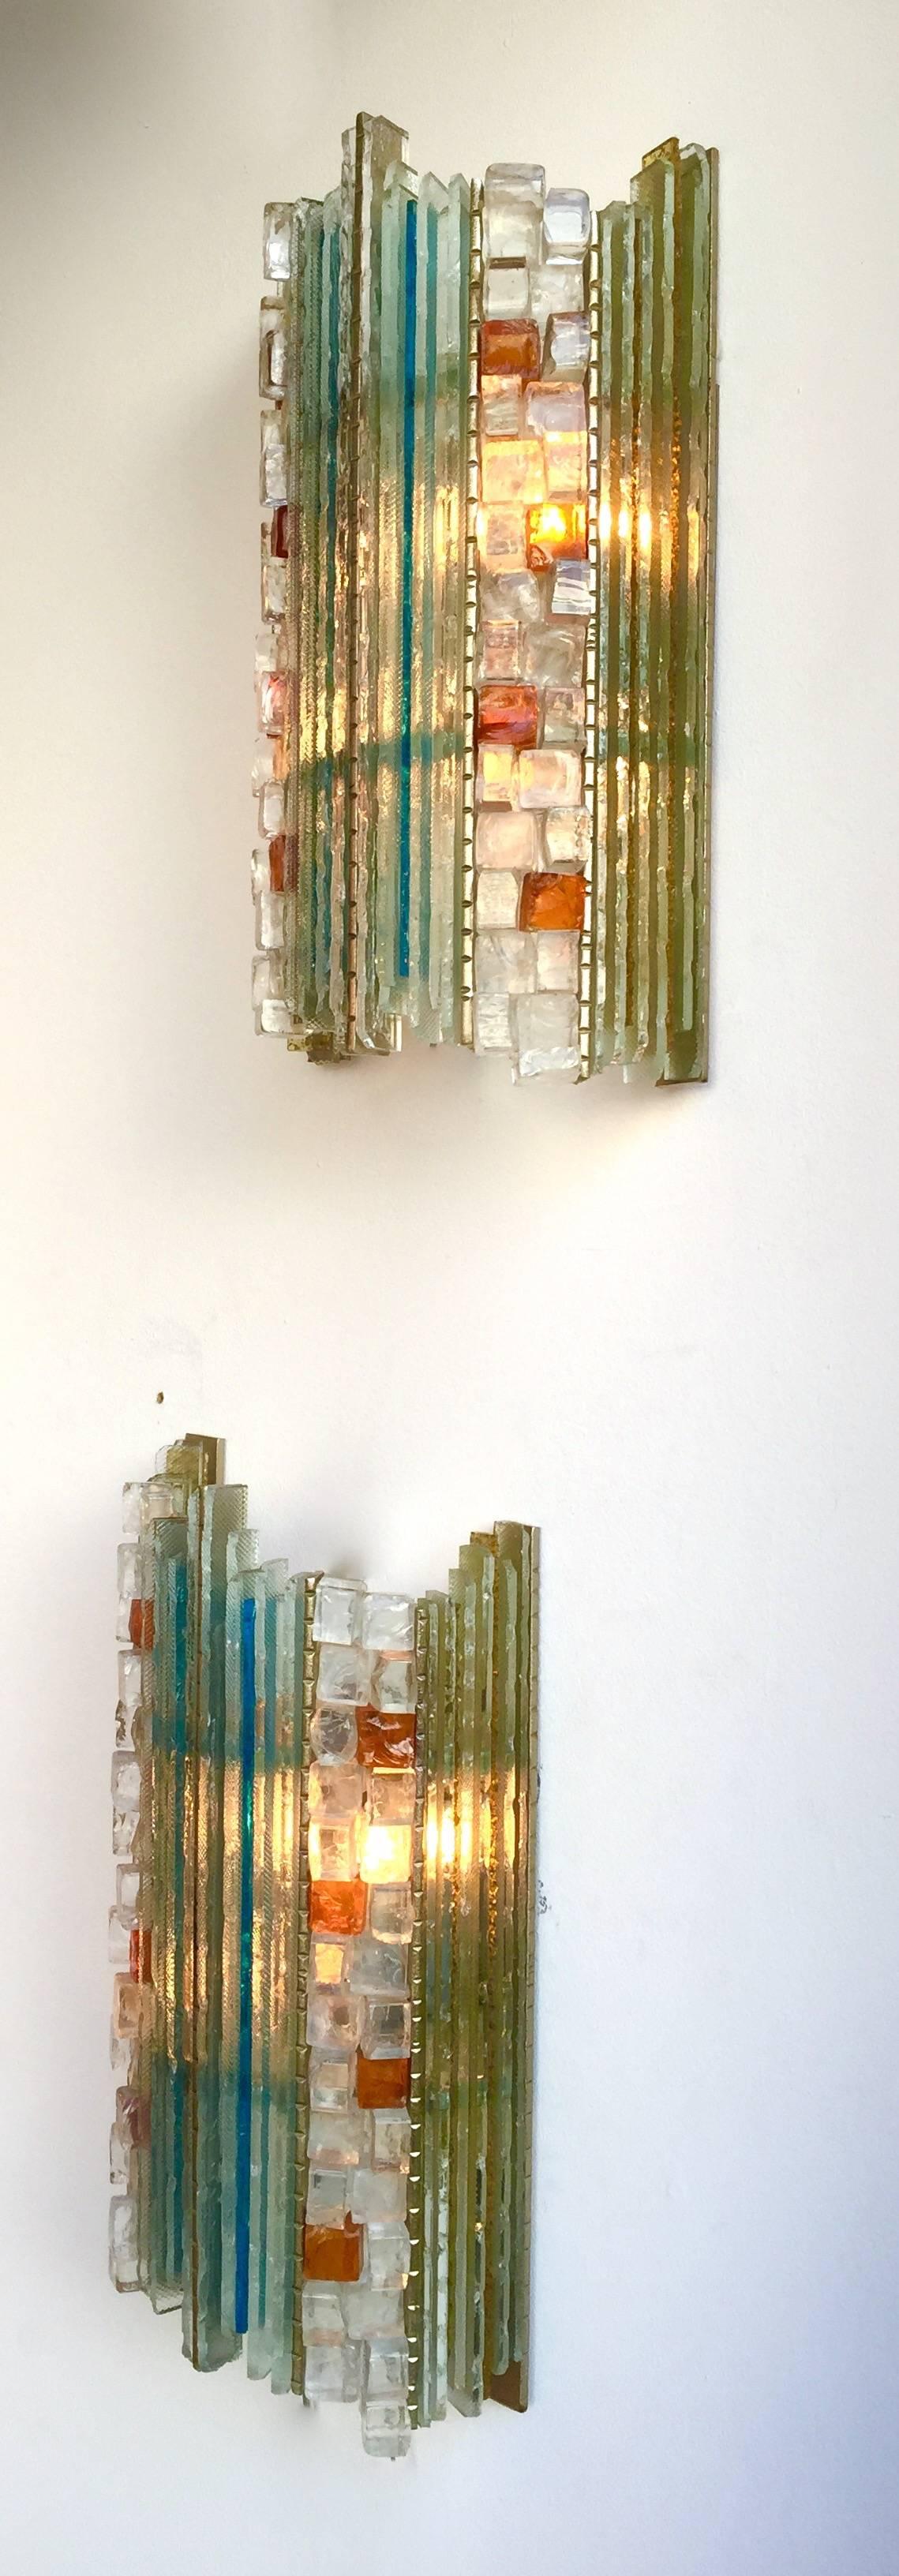 Very rare pair of Mid-Century Modern sconces by B&J Arte in Verona. The sconces are made in cut-glass mounted on a brass structure. B&J Arte is an Artistic handmade few production numbering from as few as a single example. It was the direct